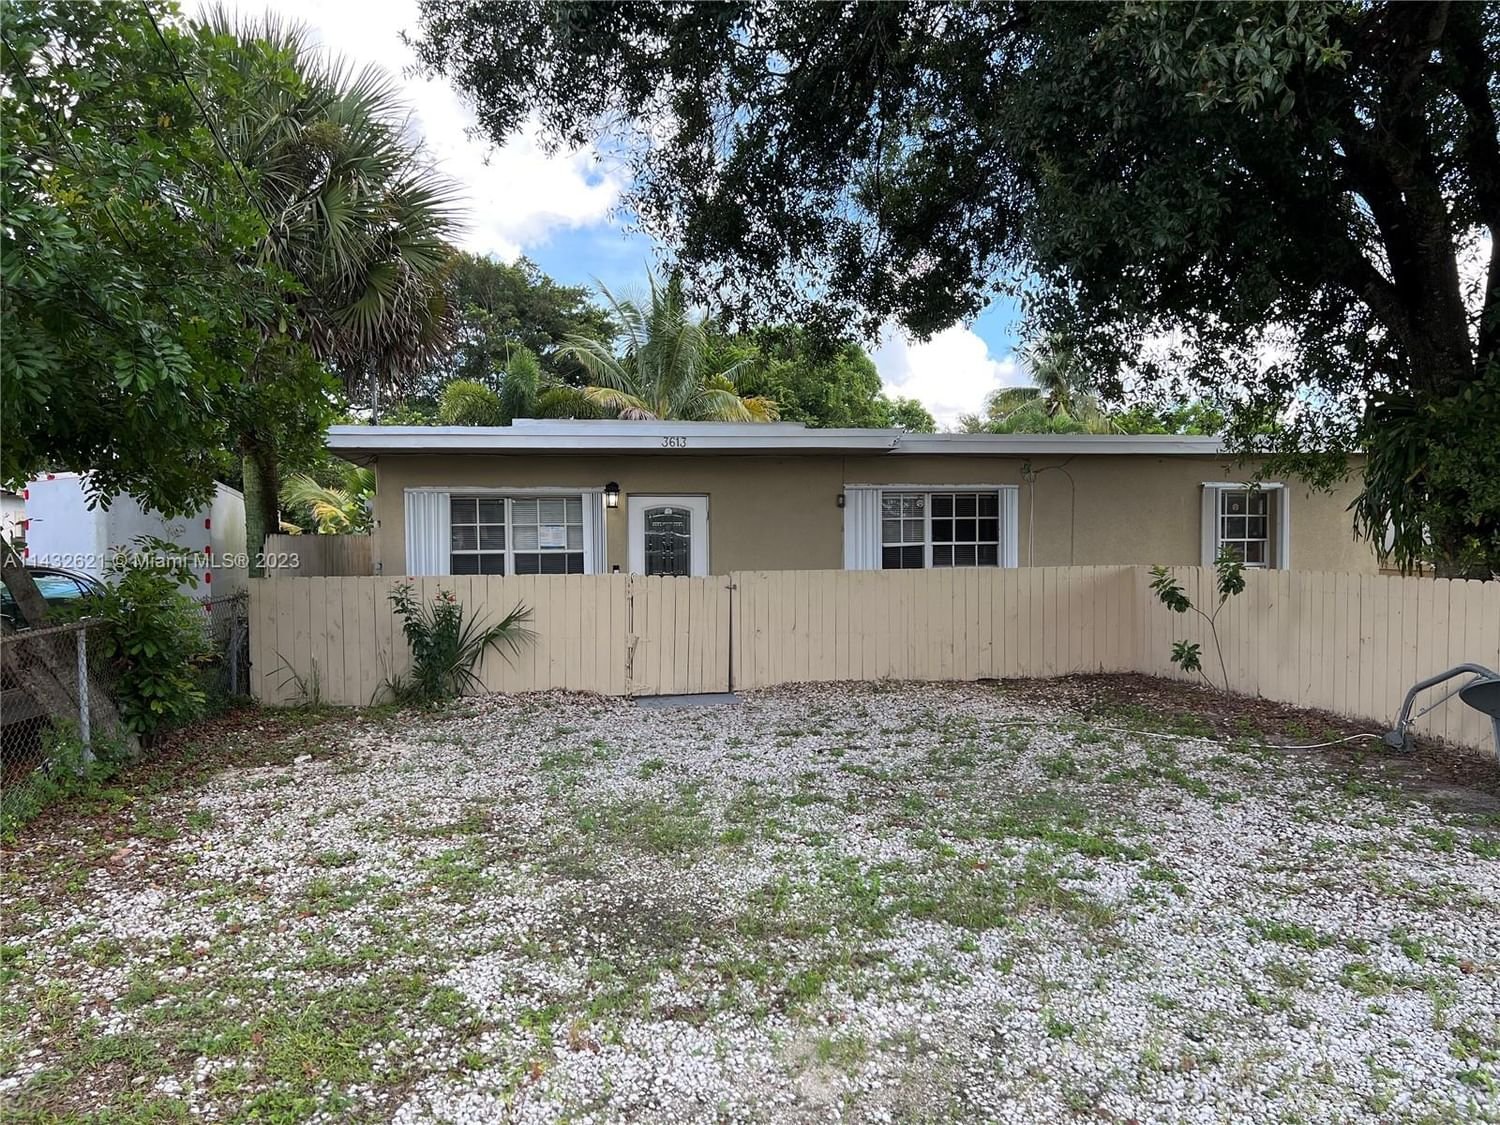 Real estate property located at 3613 12th Ct, Broward County, Fort Lauderdale, FL